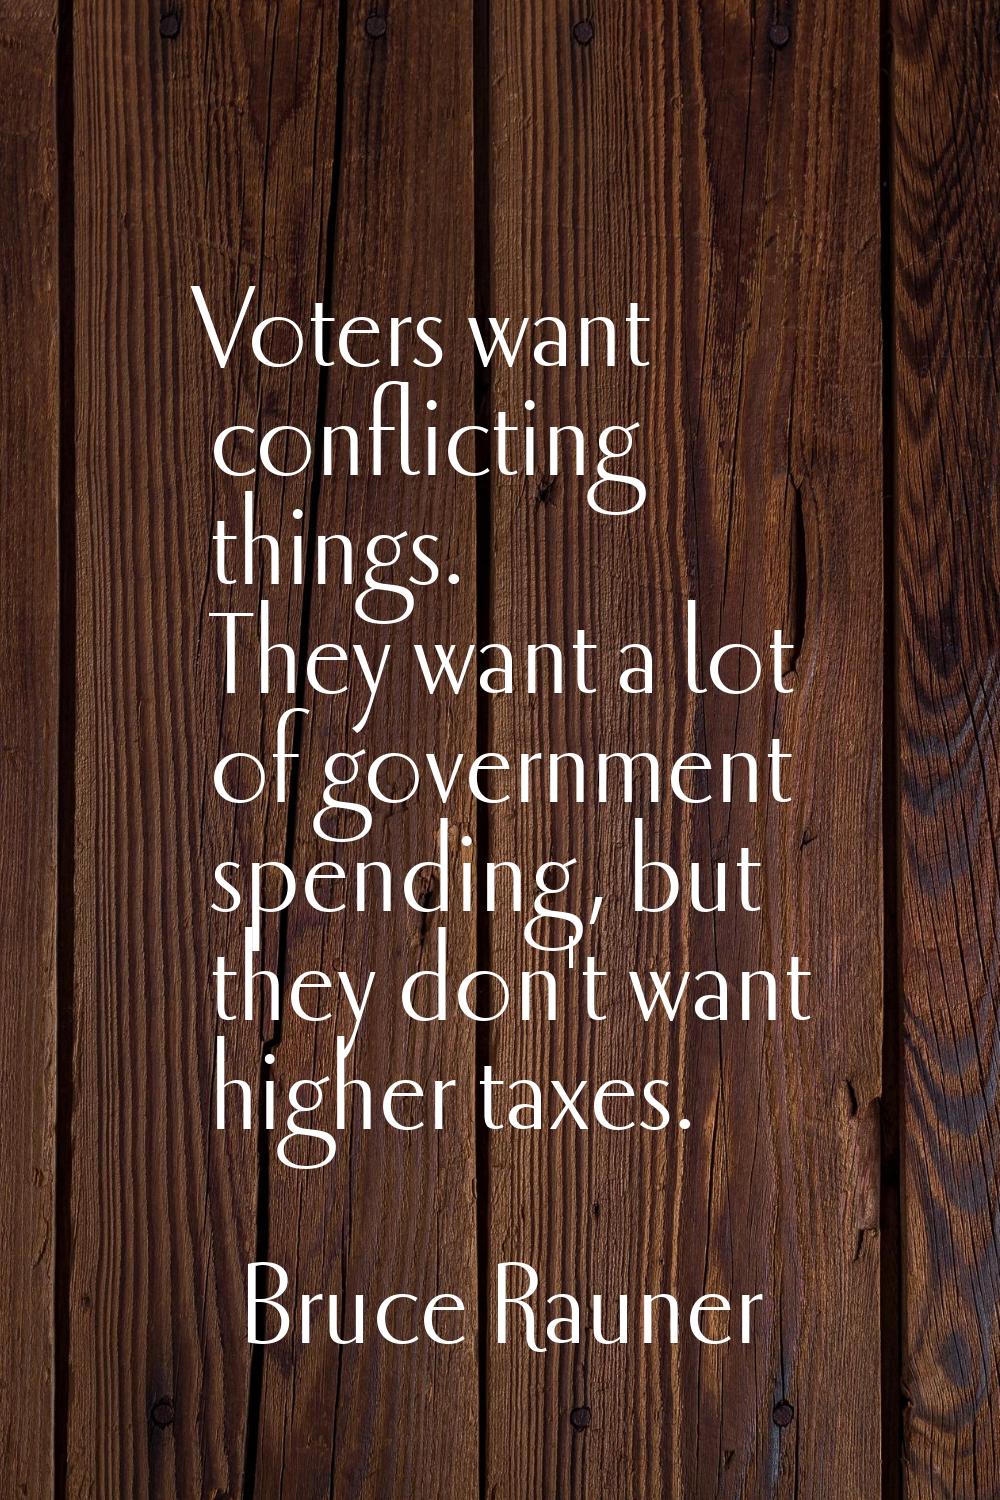 Voters want conflicting things. They want a lot of government spending, but they don't want higher 